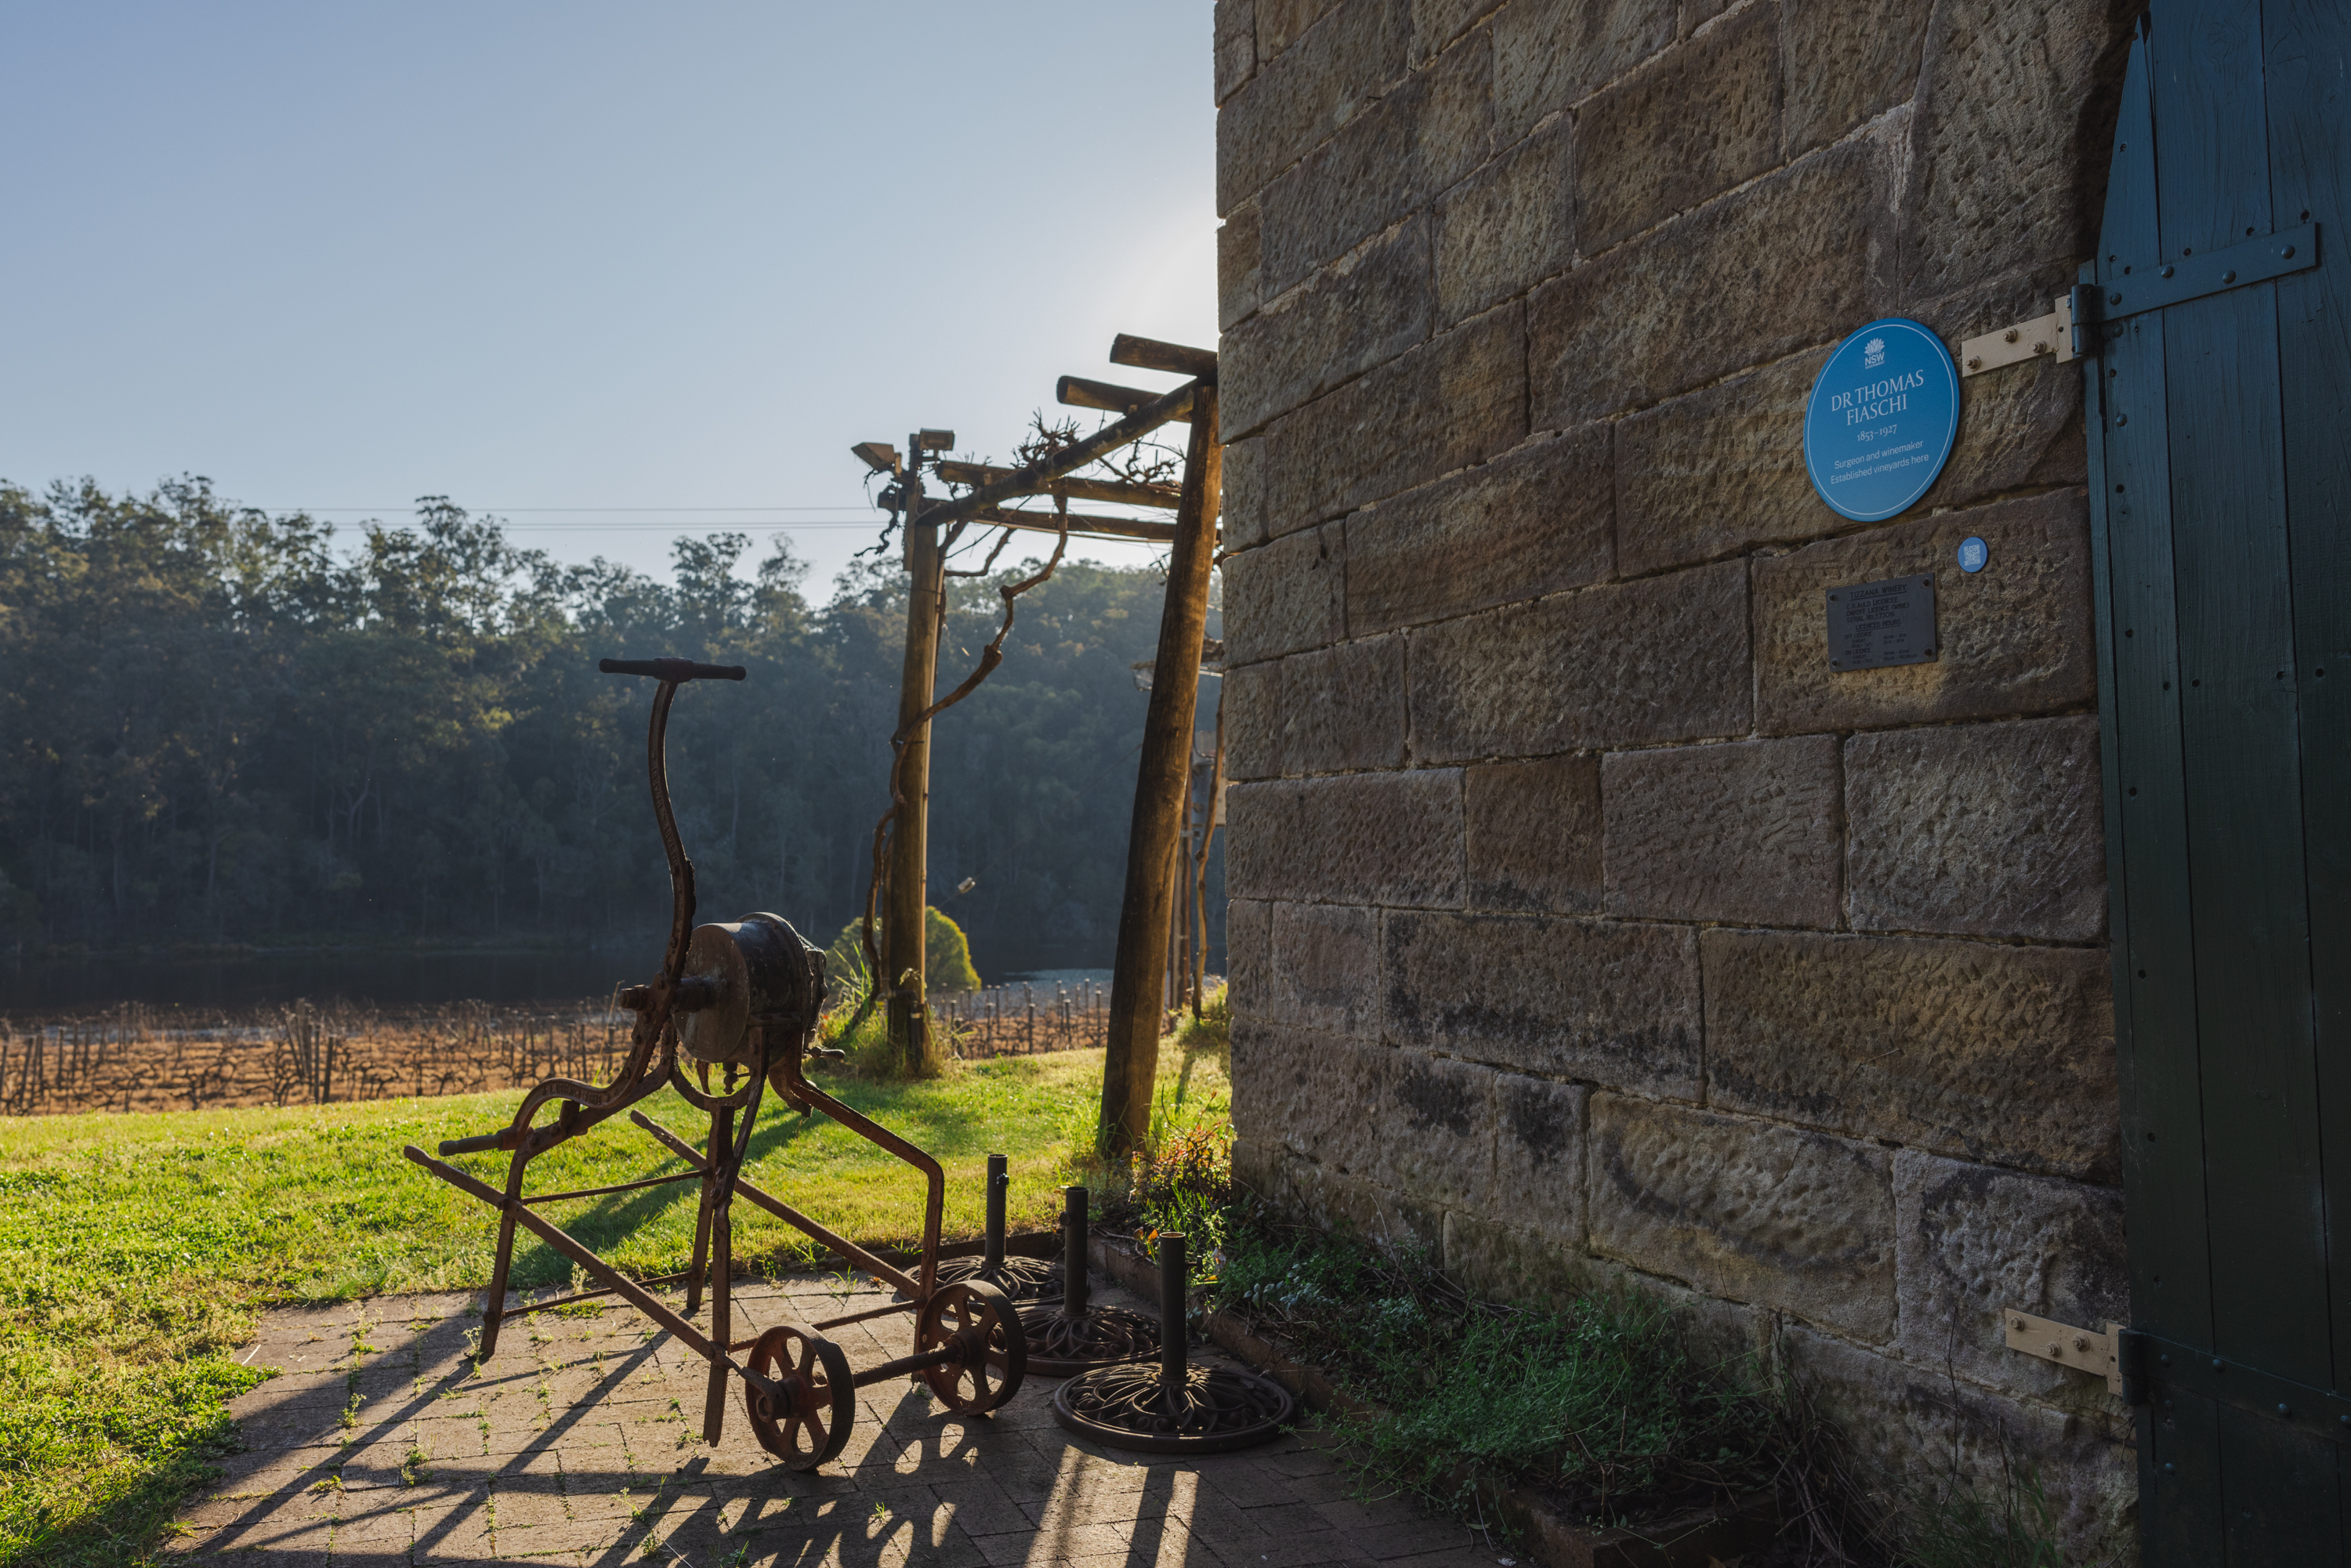 Image 5 of 6 - A picture of a blue plaque on a sandstone building with a vineyard in the background